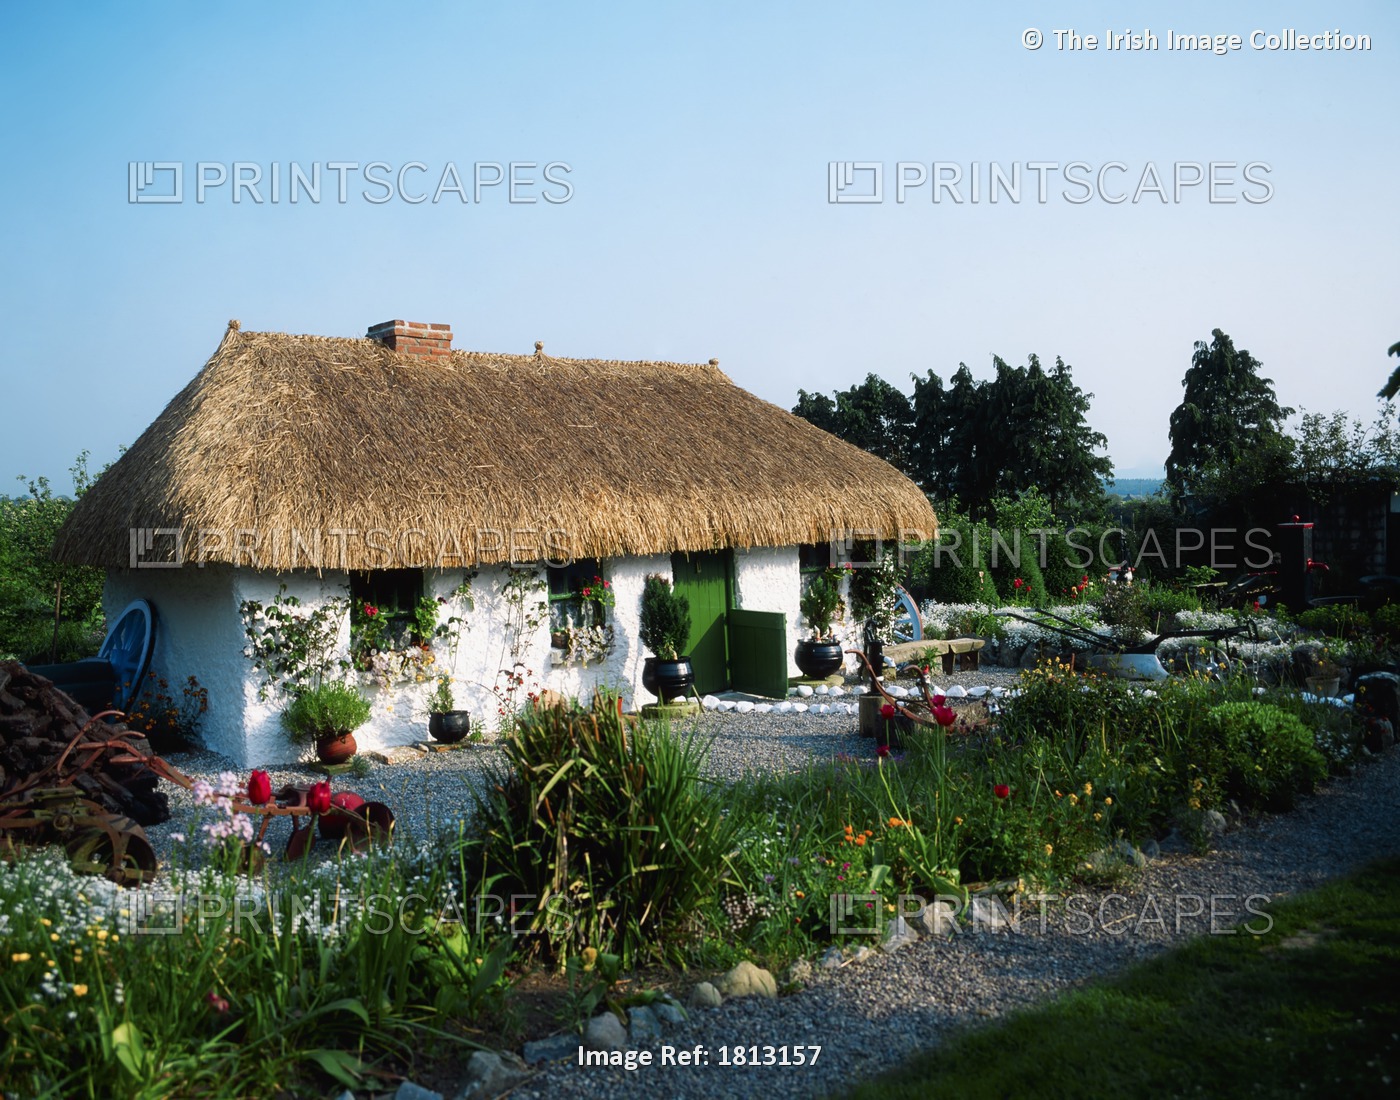 Co Laois, Ireland, Traditional Cottage